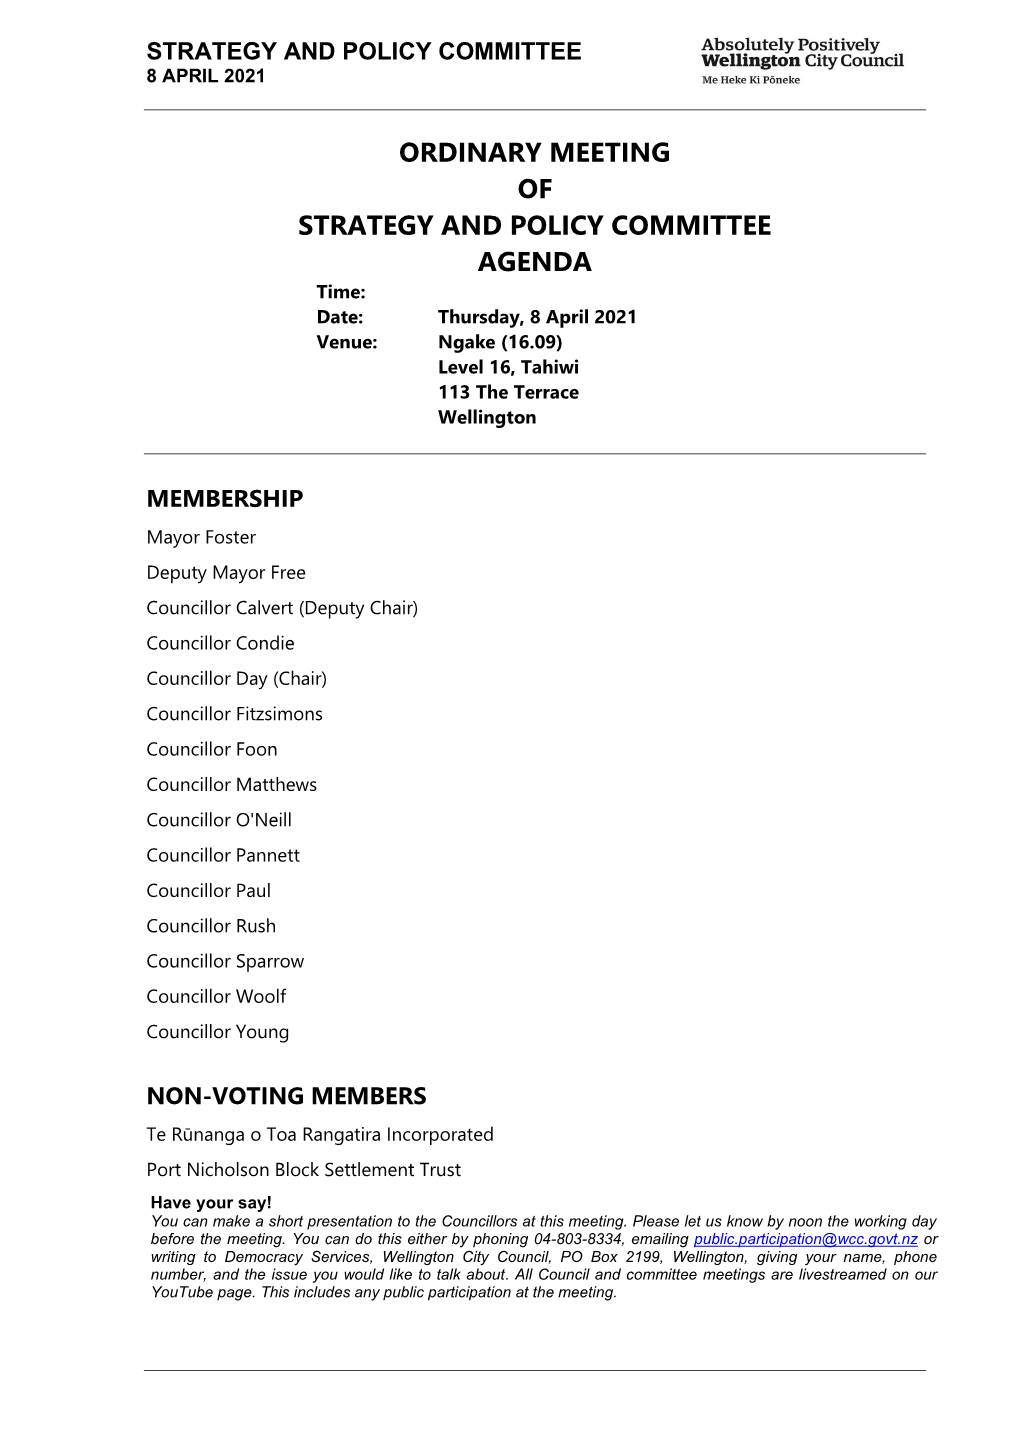 Strategy and Policy Committee Meeting Agenda 8 April 2021